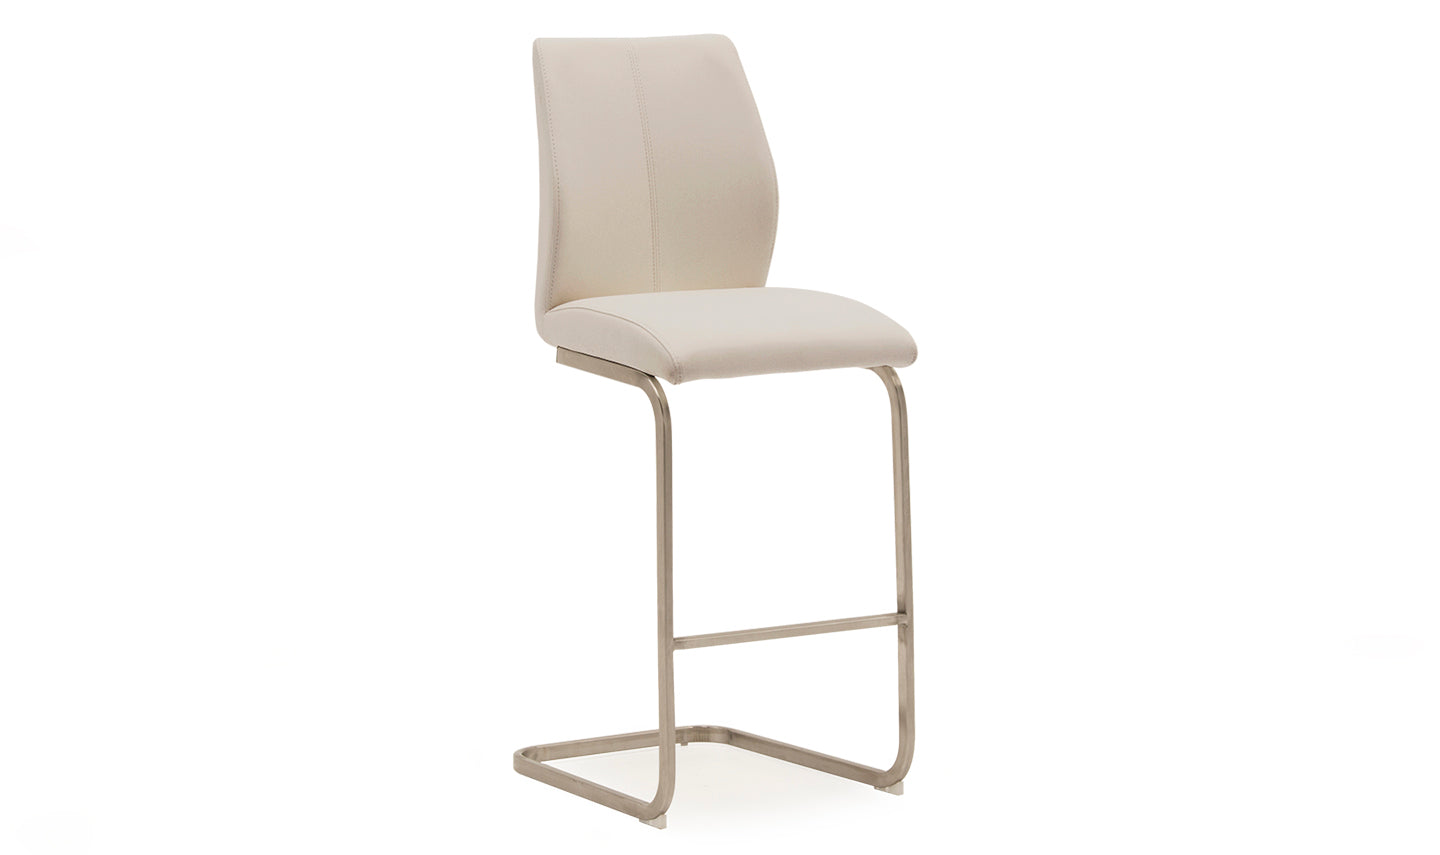 Pair of Marla Bar Stool Faux Leather in Taupe